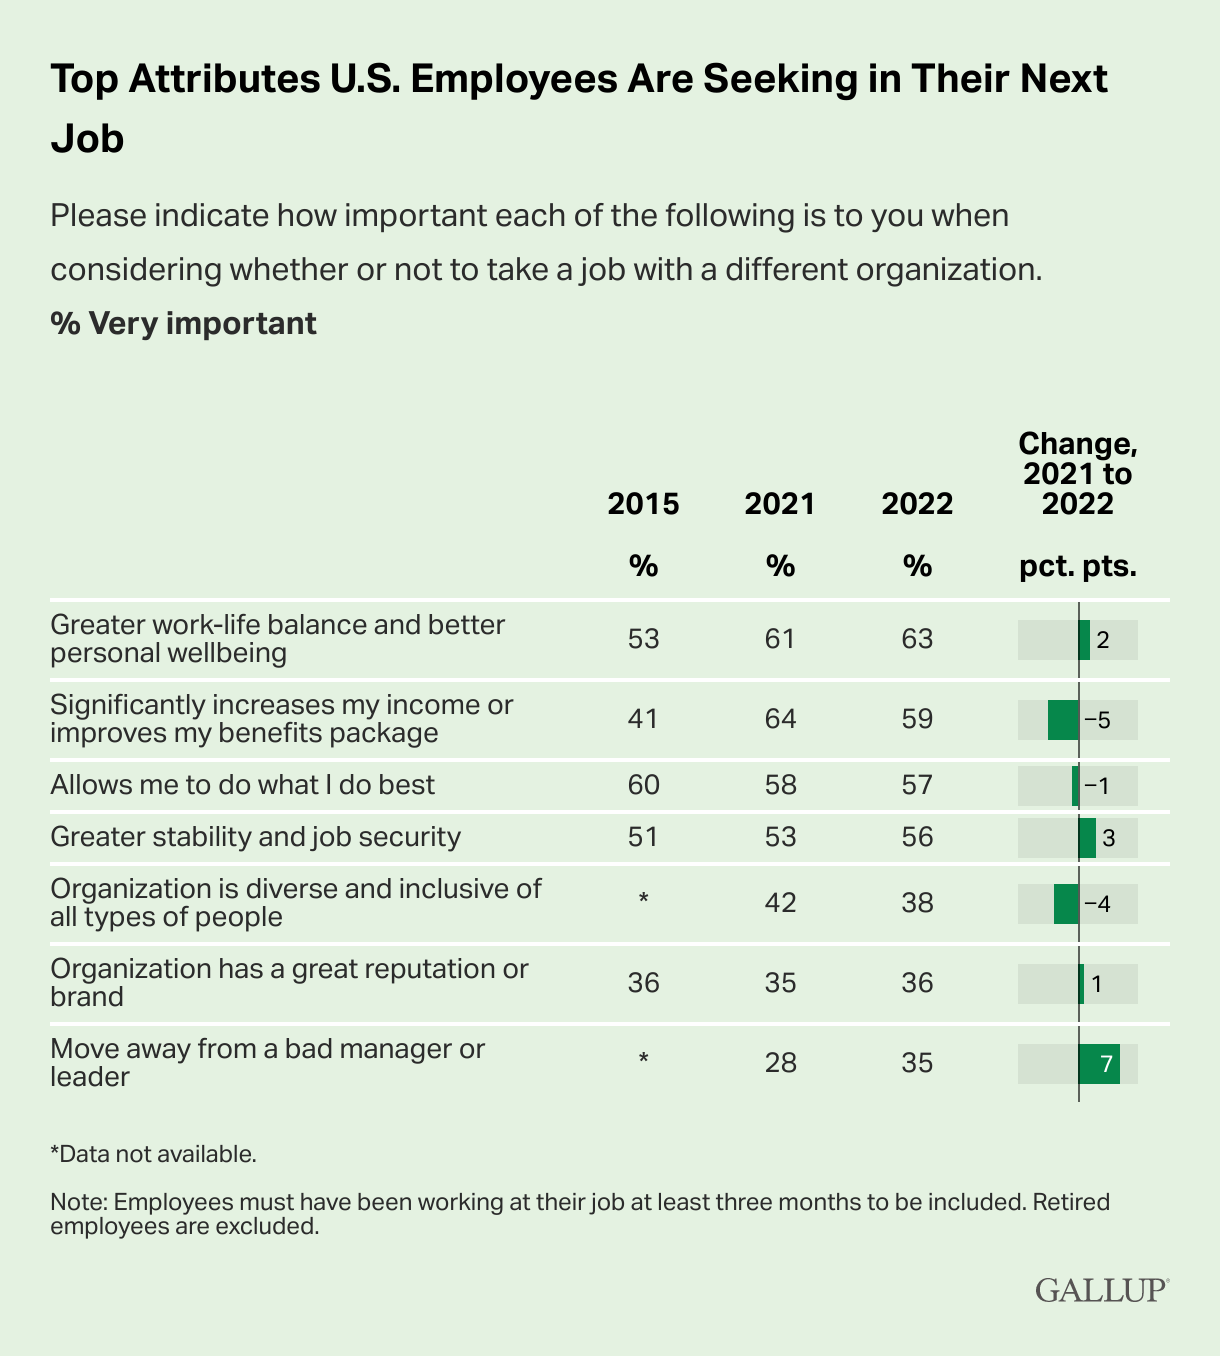 An image showing data on the top attributes U.S. employees are seeking in their next job (from Gallup's survey).